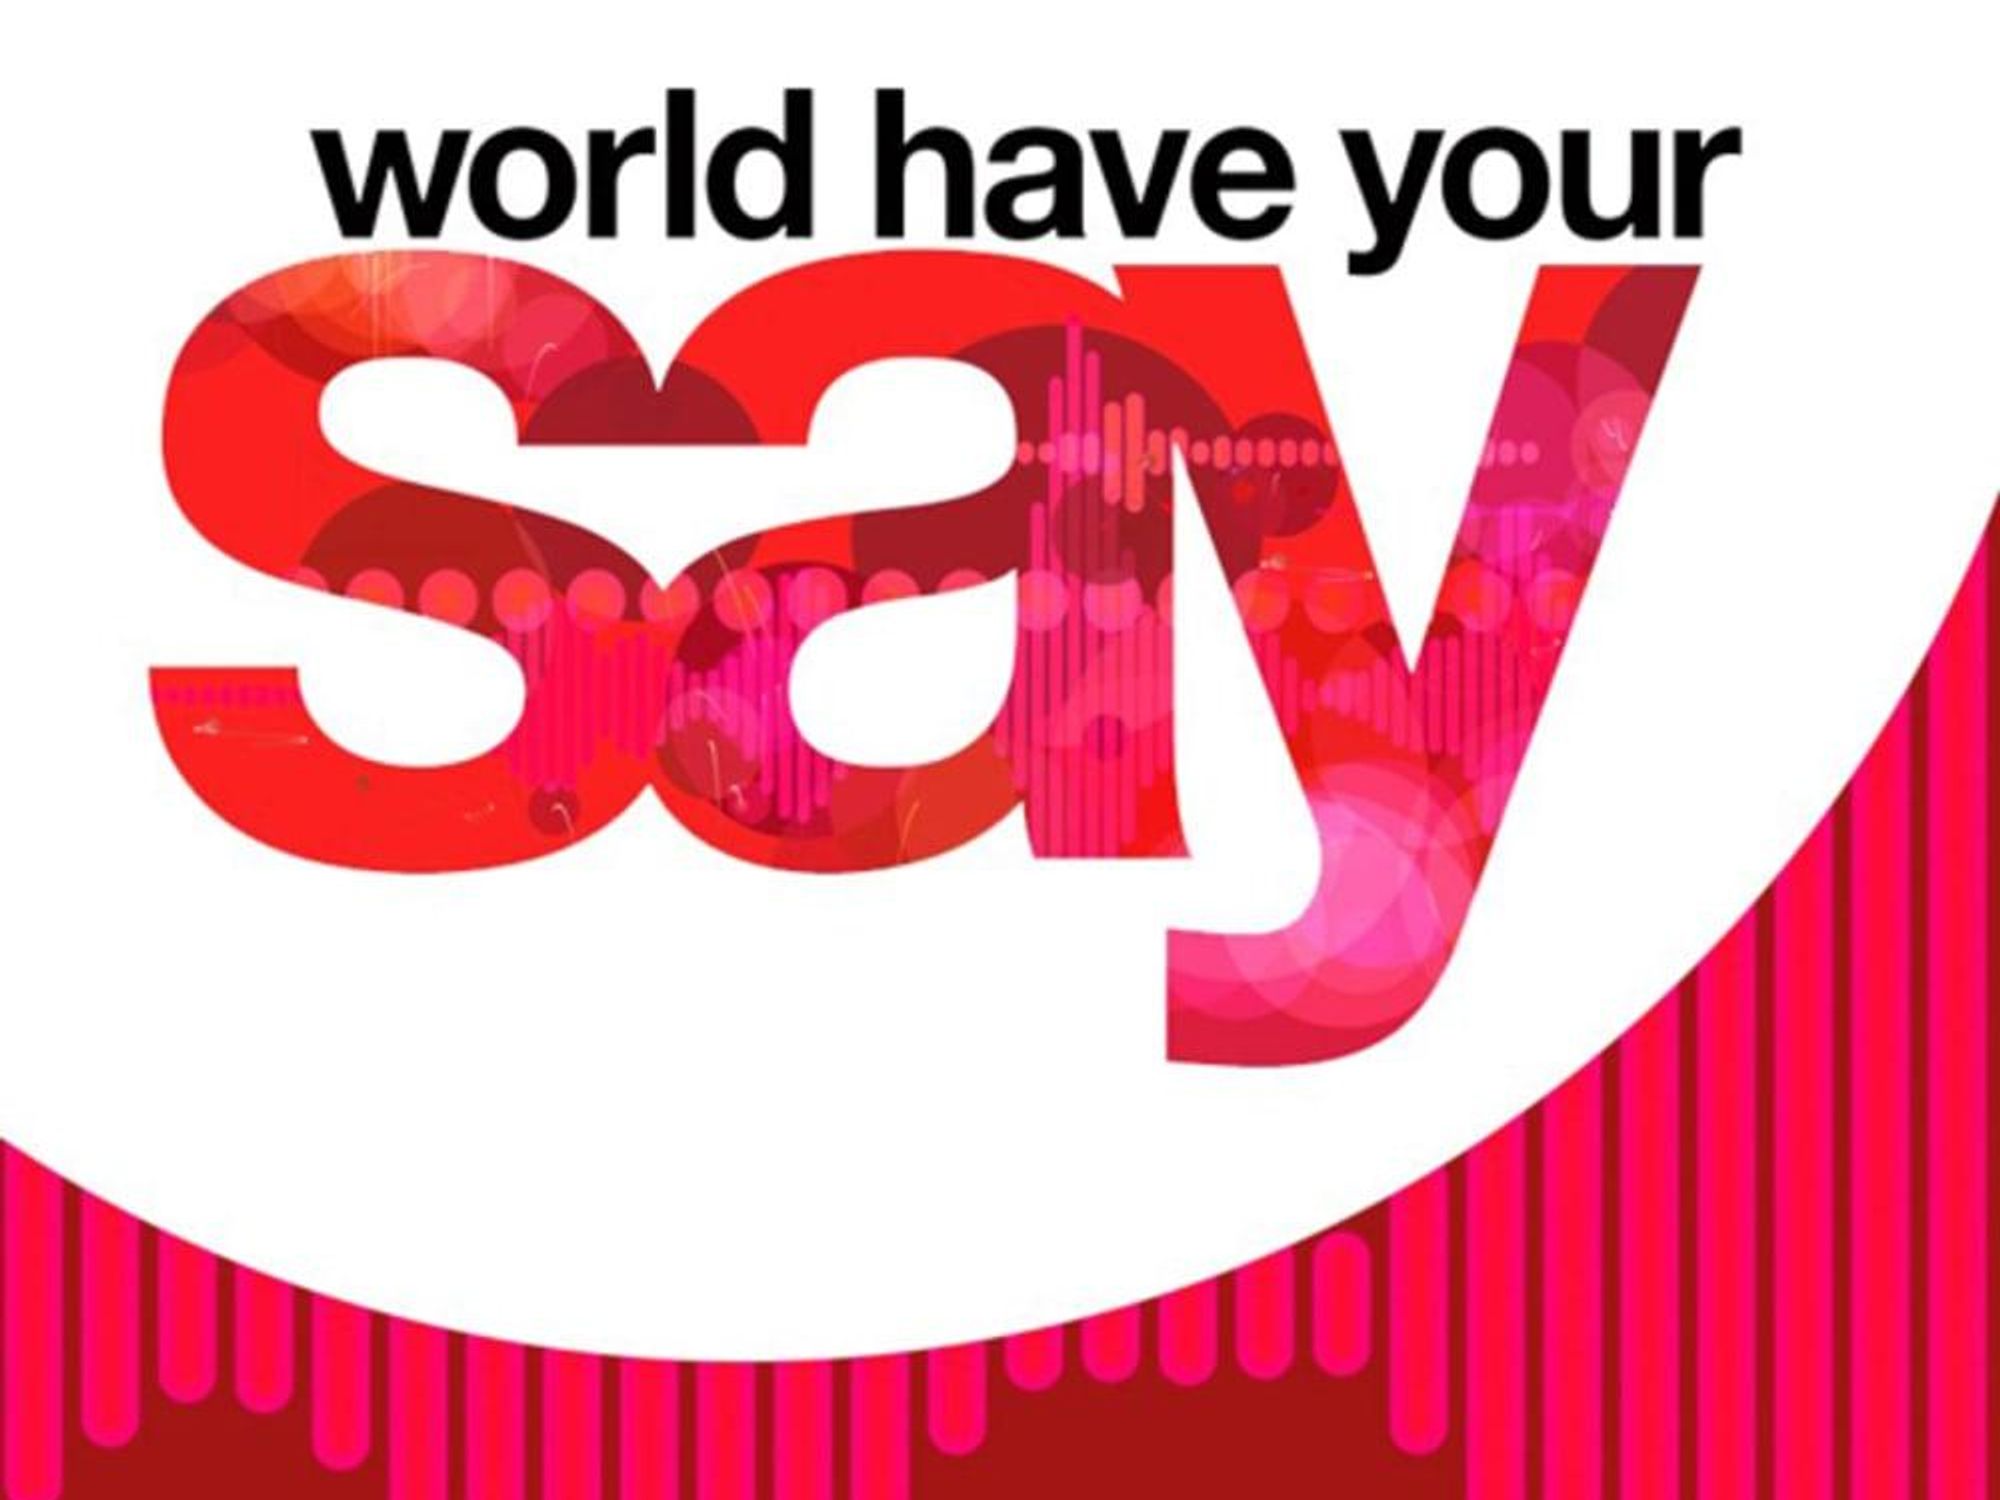 BBC World Have Your Say live broadcast from KUT